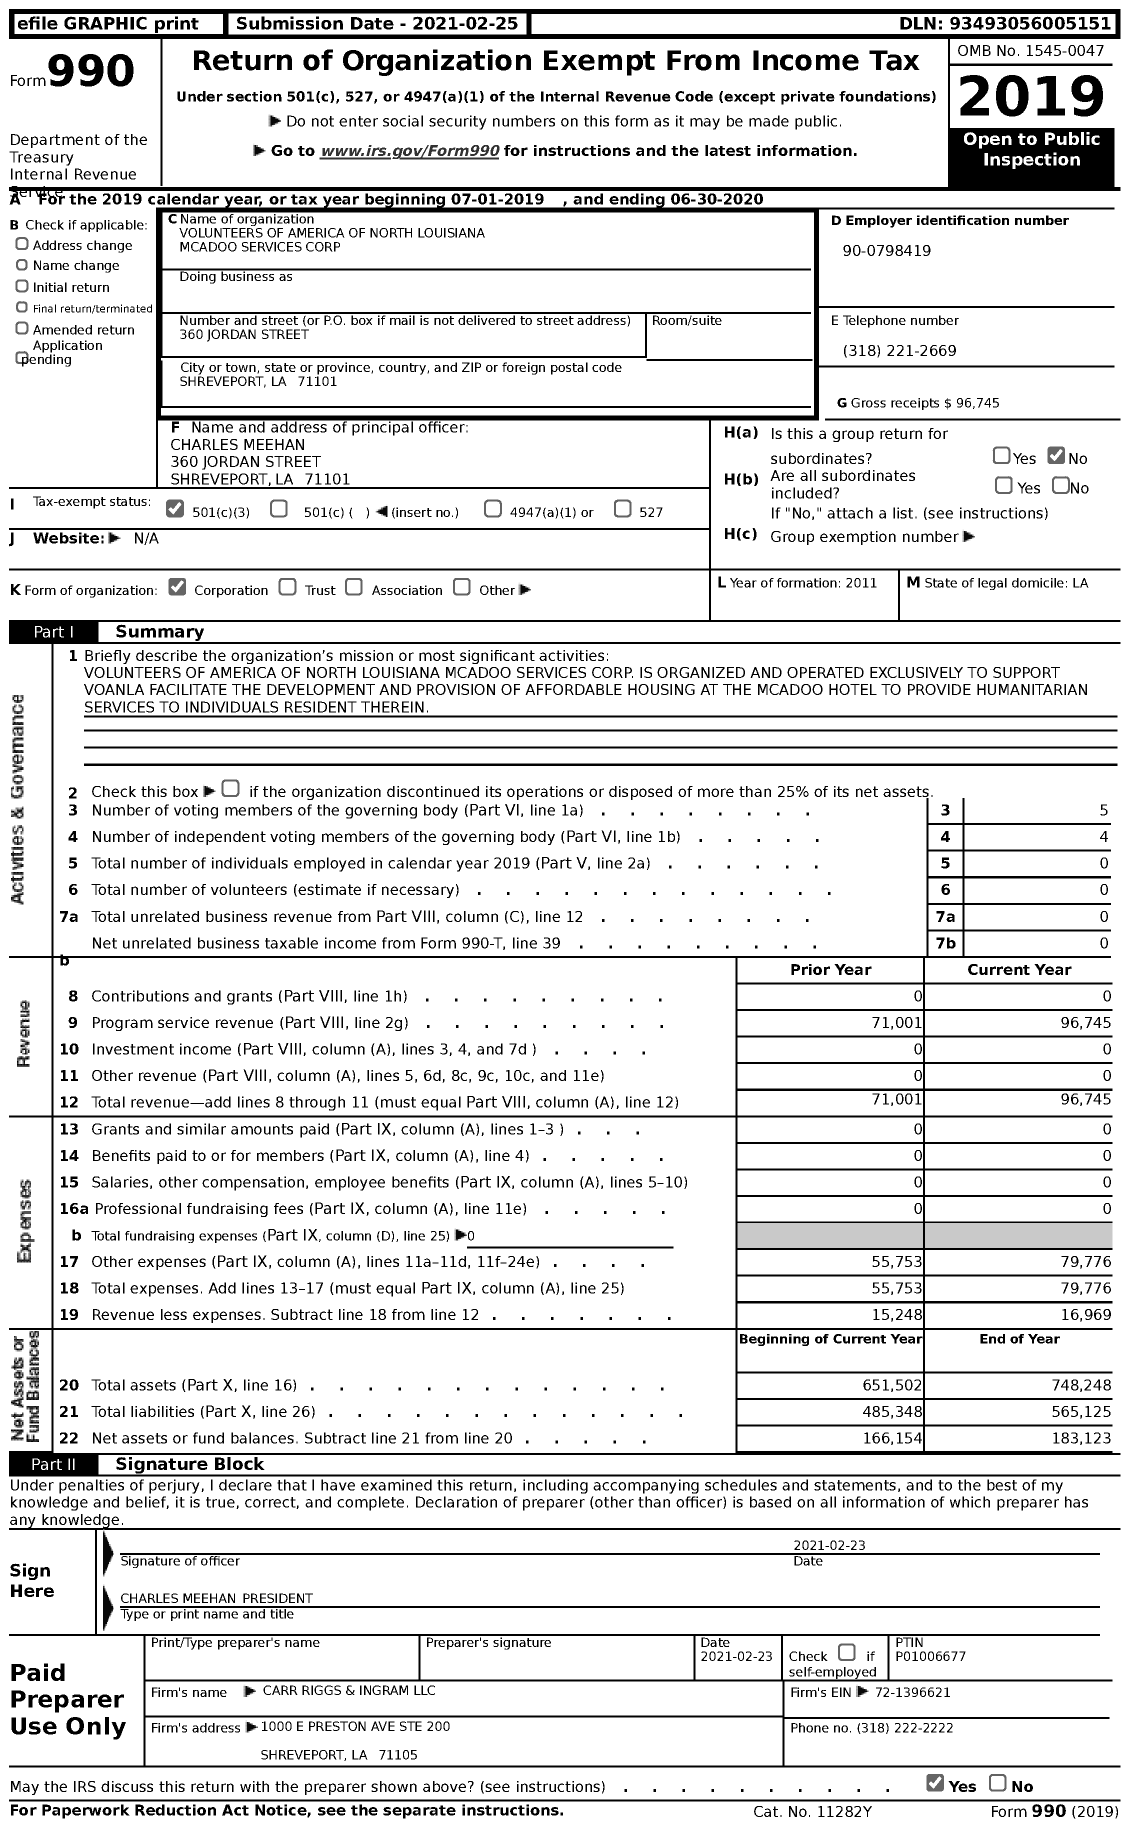 Image of first page of 2019 Form 990 for Volunteers of America of North Louisiana Mcadoo Services Corporation